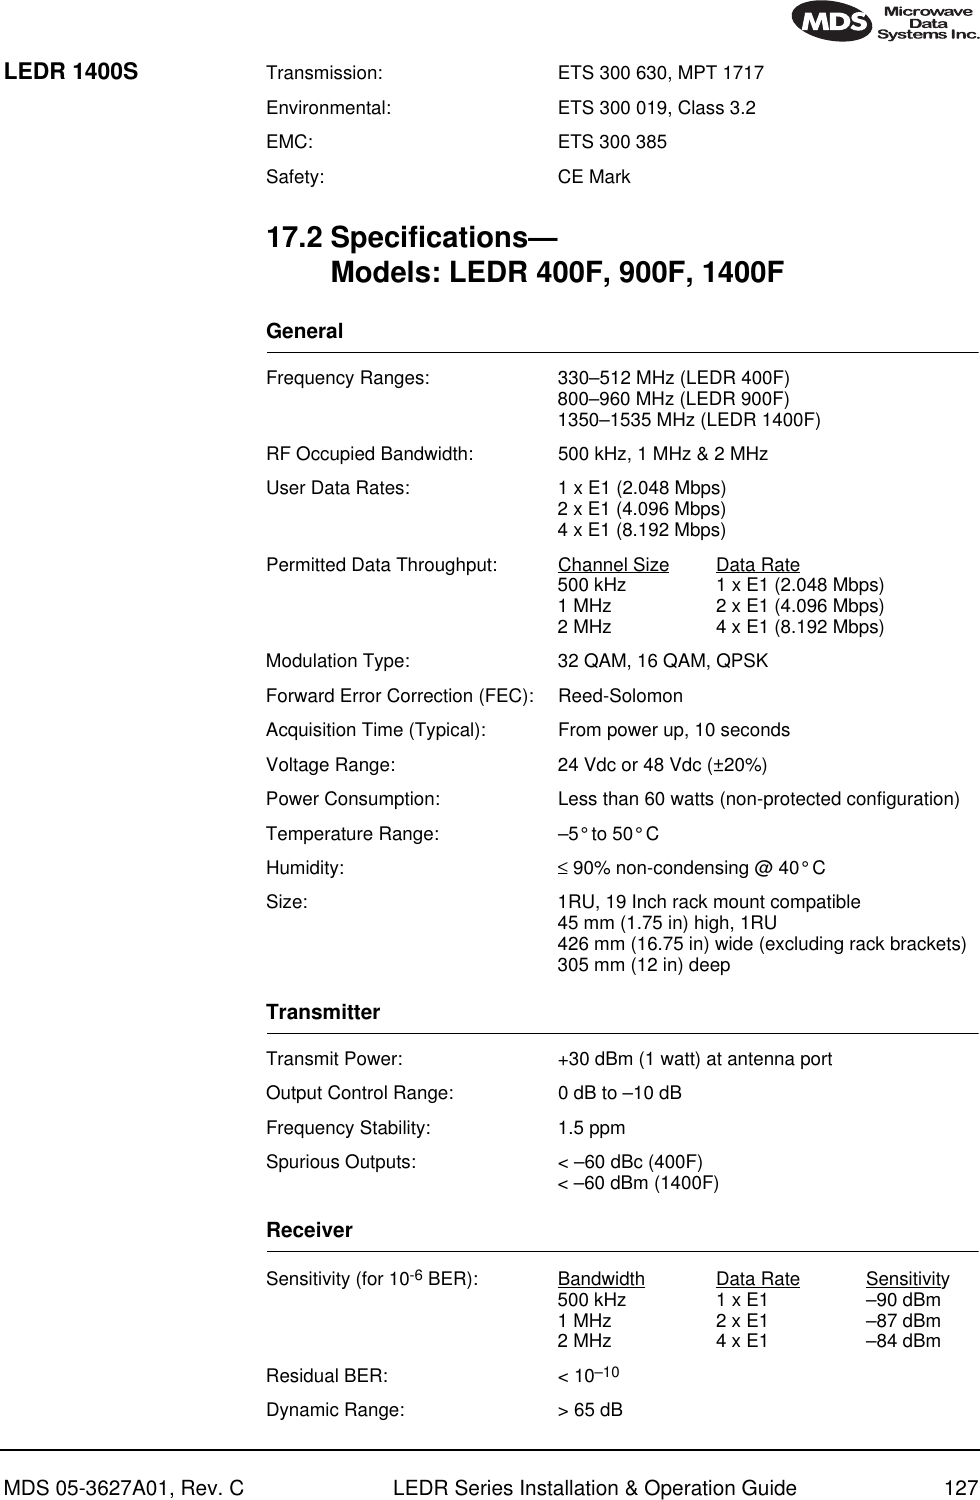 MDS 05-3627A01, Rev. C LEDR Series Installation &amp; Operation Guide 127LEDR 1400S Transmission: ETS 300 630, MPT 1717Environmental: ETS 300 019, Class 3.2EMC: ETS 300 385Safety: CE Mark17.2 Specifications—Models: LEDR 400F, 900F, 1400FGeneral Frequency Ranges: 330–512 MHz (LEDR 400F)800–960 MHz (LEDR 900F)1350–1535 MHz (LEDR 1400F)RF Occupied Bandwidth: 500 kHz, 1 MHz &amp; 2 MHzUser Data Rates: 1 x E1 (2.048 Mbps)2 x E1 (4.096 Mbps)4 x E1 (8.192 Mbps)Permitted Data Throughput: Channel Size Data Rate500 kHz 1 x E1 (2.048 Mbps)1 MHz 2 x E1 (4.096 Mbps)2 MHz 4 x E1 (8.192 Mbps)Modulation Type: 32 QAM, 16 QAM, QPSKForward Error Correction (FEC): Reed-SolomonAcquisition Time (Typical): From power up, 10 secondsVoltage Range: 24 Vdc or 48 Vdc (±20%)Power Consumption: Less than 60 watts (non-protected configuration)Temperature Range: –5° to 50° CHumidity: ≤ 90% non-condensing @ 40° CSize: 1RU, 19 Inch rack mount compatible45 mm (1.75 in) high, 1RU426 mm (16.75 in) wide (excluding rack brackets)305 mm (12 in) deepTransmitterTransmit Power:  +30 dBm (1 watt) at antenna portOutput Control Range: 0 dB to –10 dBFrequency Stability: 1.5 ppmSpurious Outputs: &lt; –60 dBc (400F)&lt; –60 dBm (1400F)ReceiverSensitivity (for 10-6 BER): Bandwidth Data Rate Sensitivity500 kHz 1 x E1 –90 dBm1 MHz 2 x E1 –87 dBm2 MHz 4 x E1 –84 dBmResidual BER: &lt; 10–10Dynamic Range: &gt; 65 dB